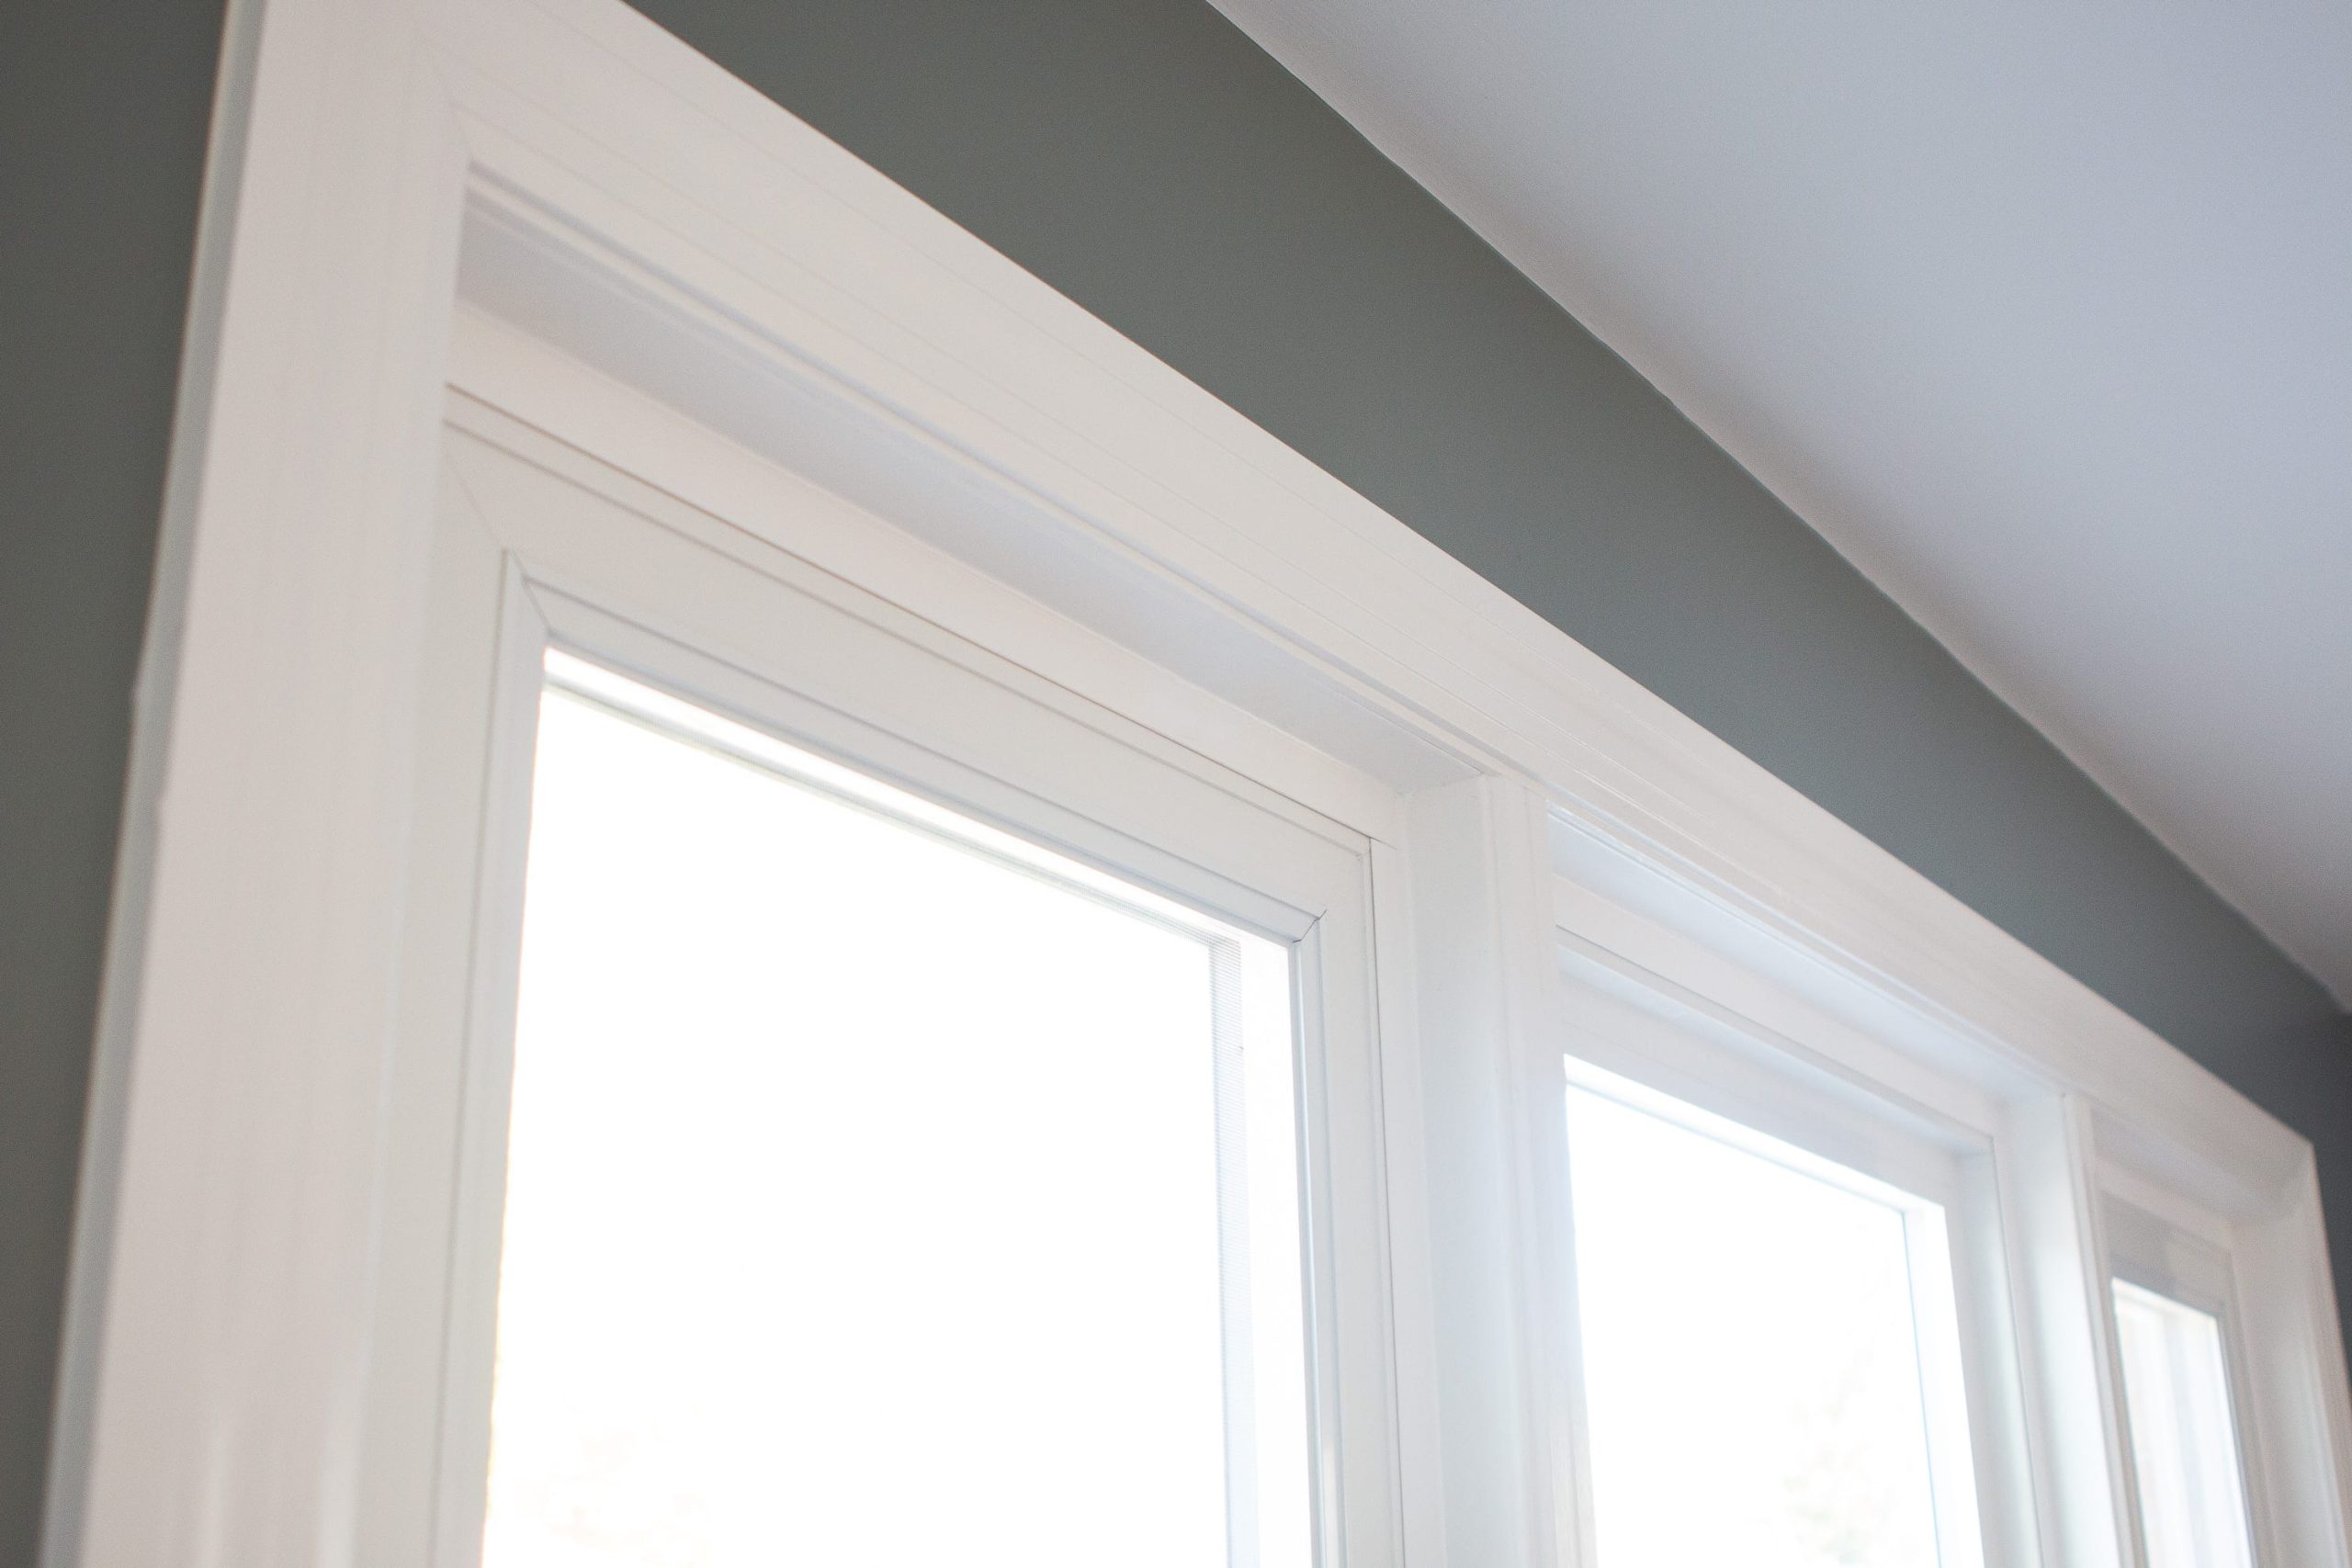 Know the depth of your windows before you place your shades order